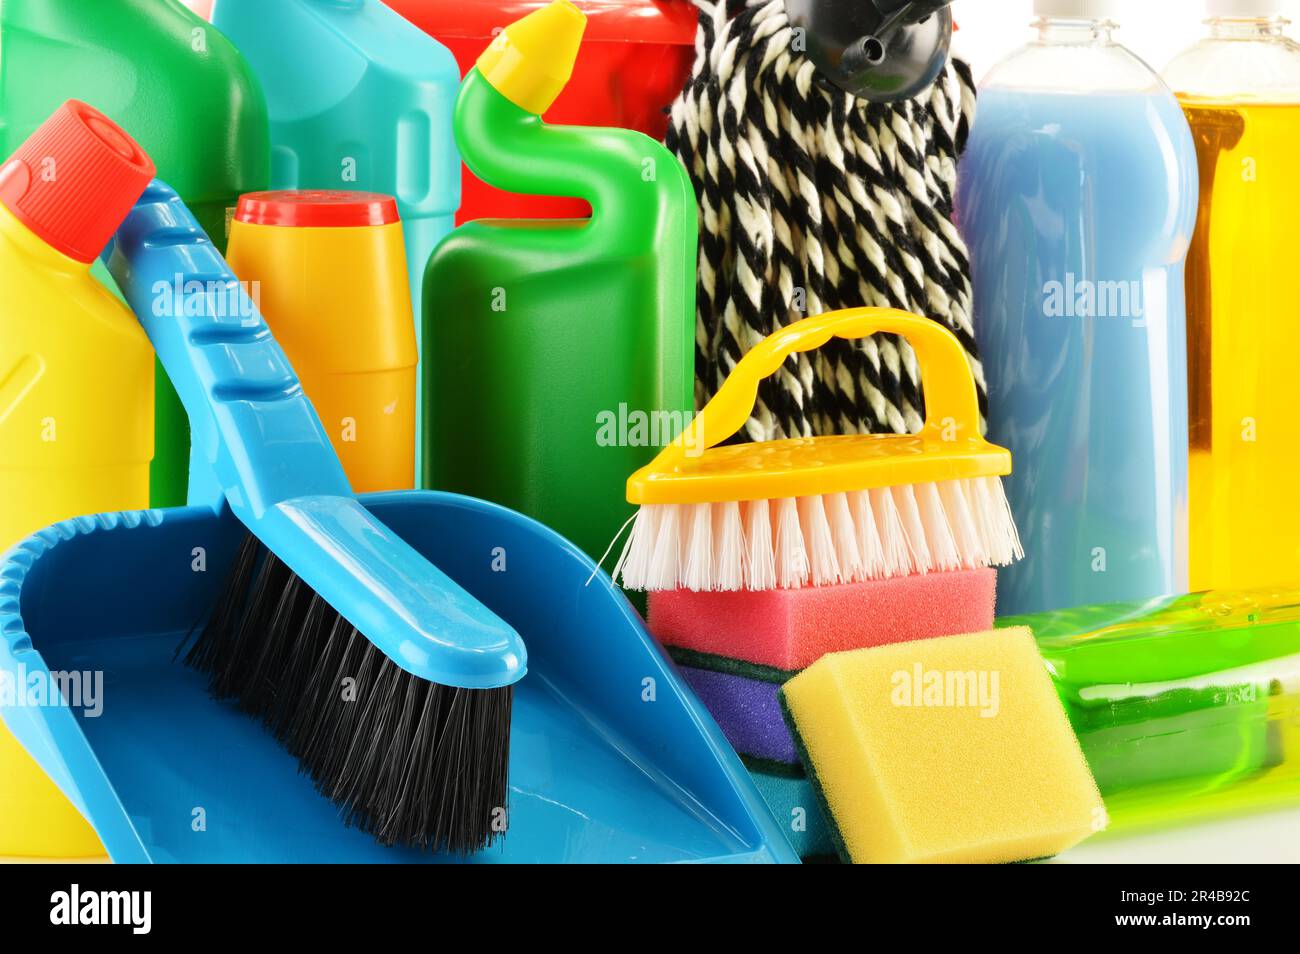 Composition with detergent bottles and chemical cleaning supplies Stock Photo